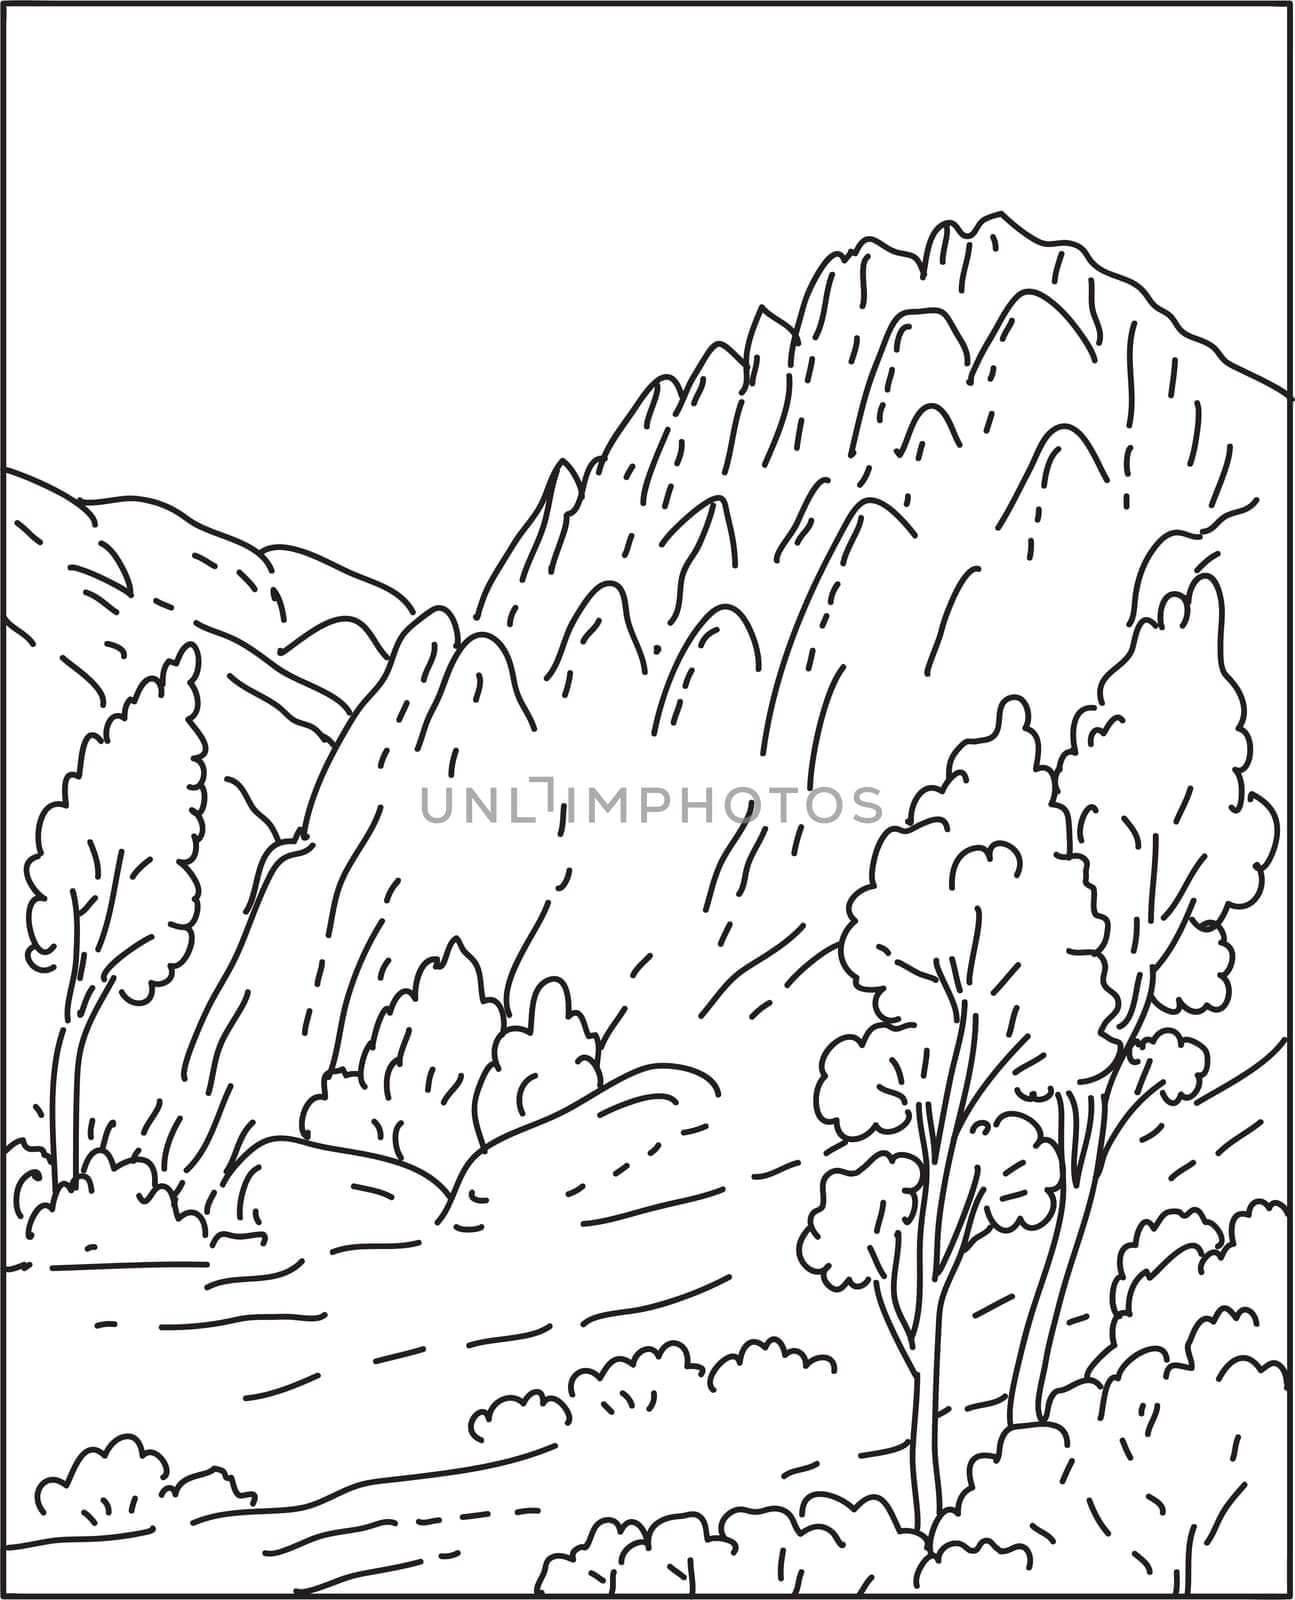 Mono line illustration of Pinnacles National Park located east of the Salinas Valley in Central California, USA done in monoline line art style.